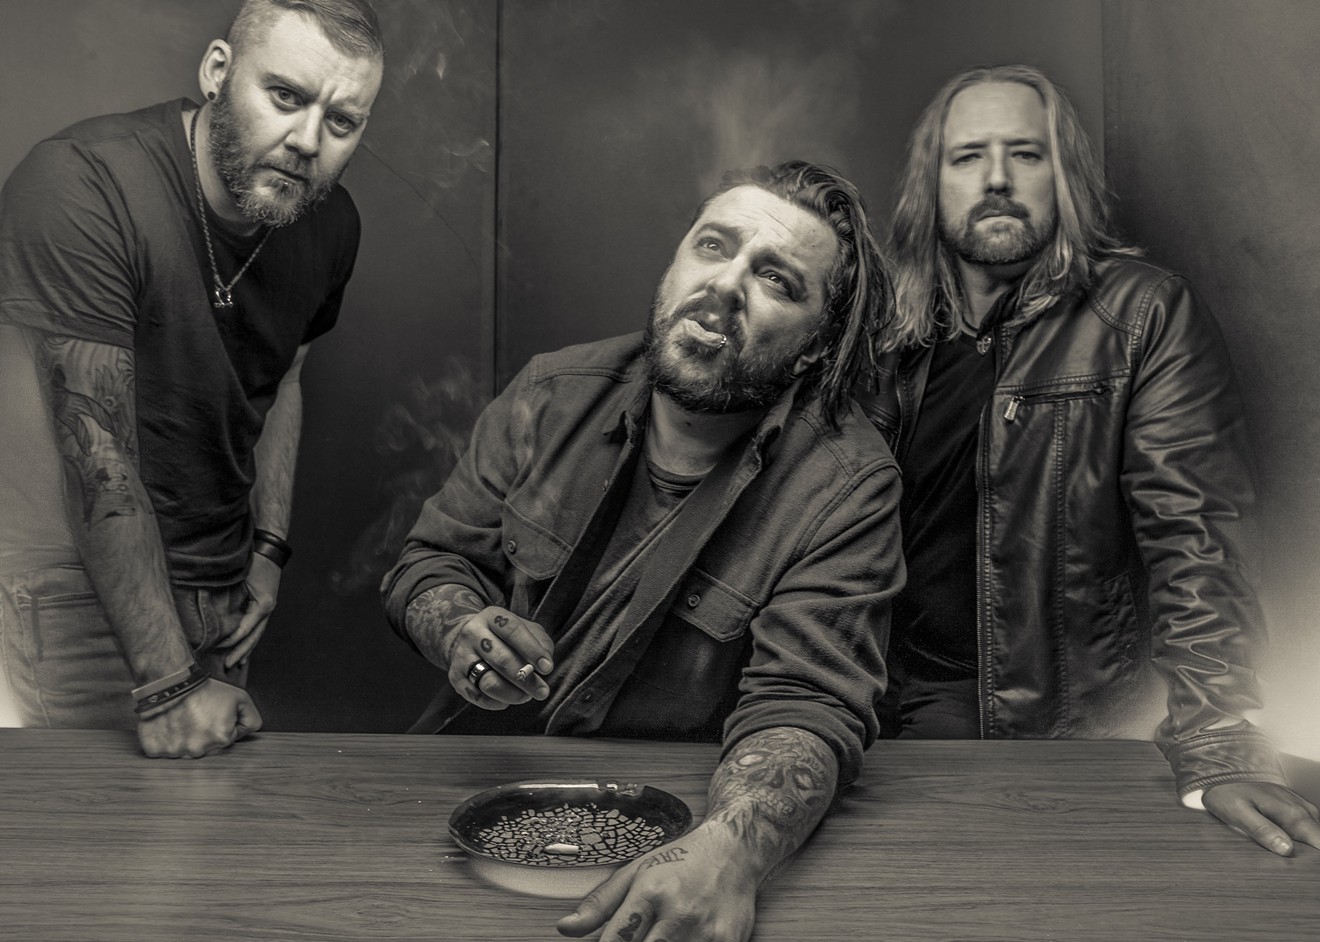 We catch up with John Humphrey (right) of Seether.